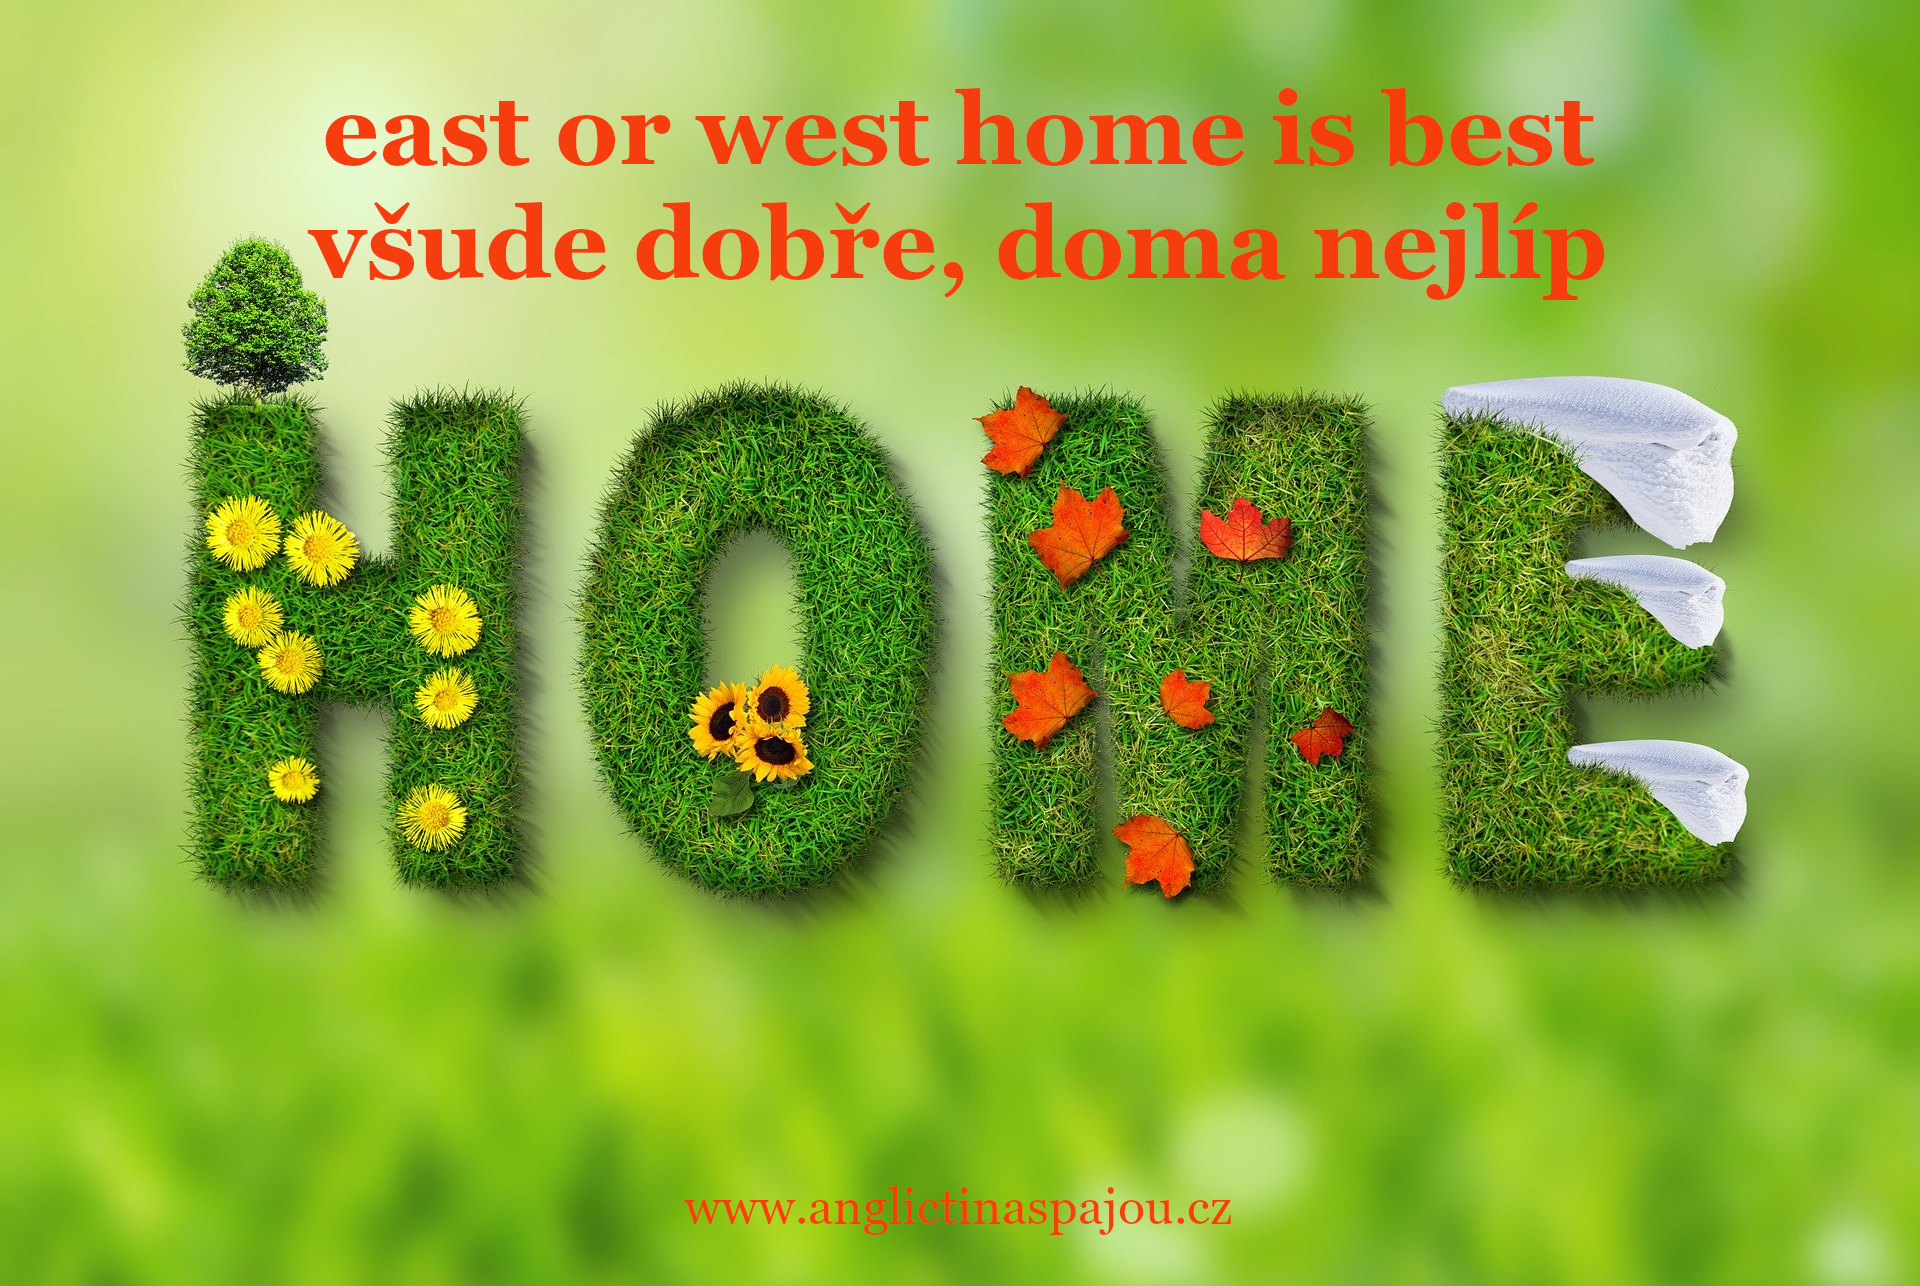 east or west home is best essay